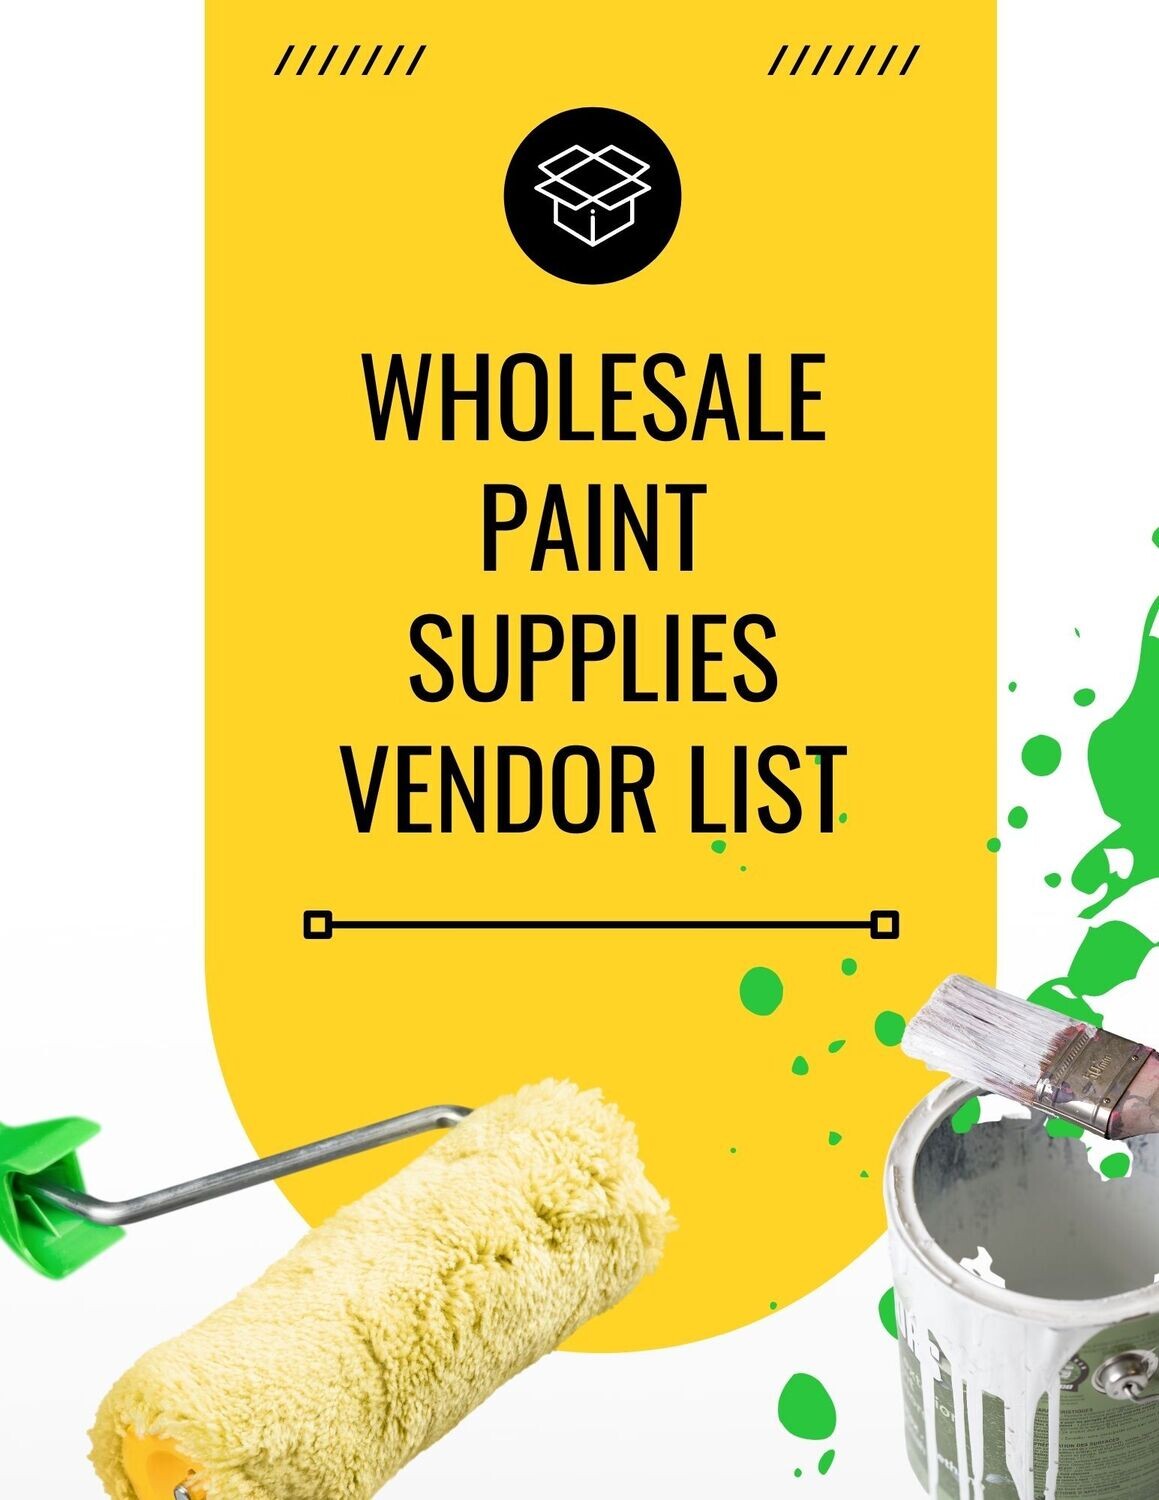 Verified Wholesale Paint Supplies Vendor List - Contractor and Painting Equipment - Commercial Painting Supplier List